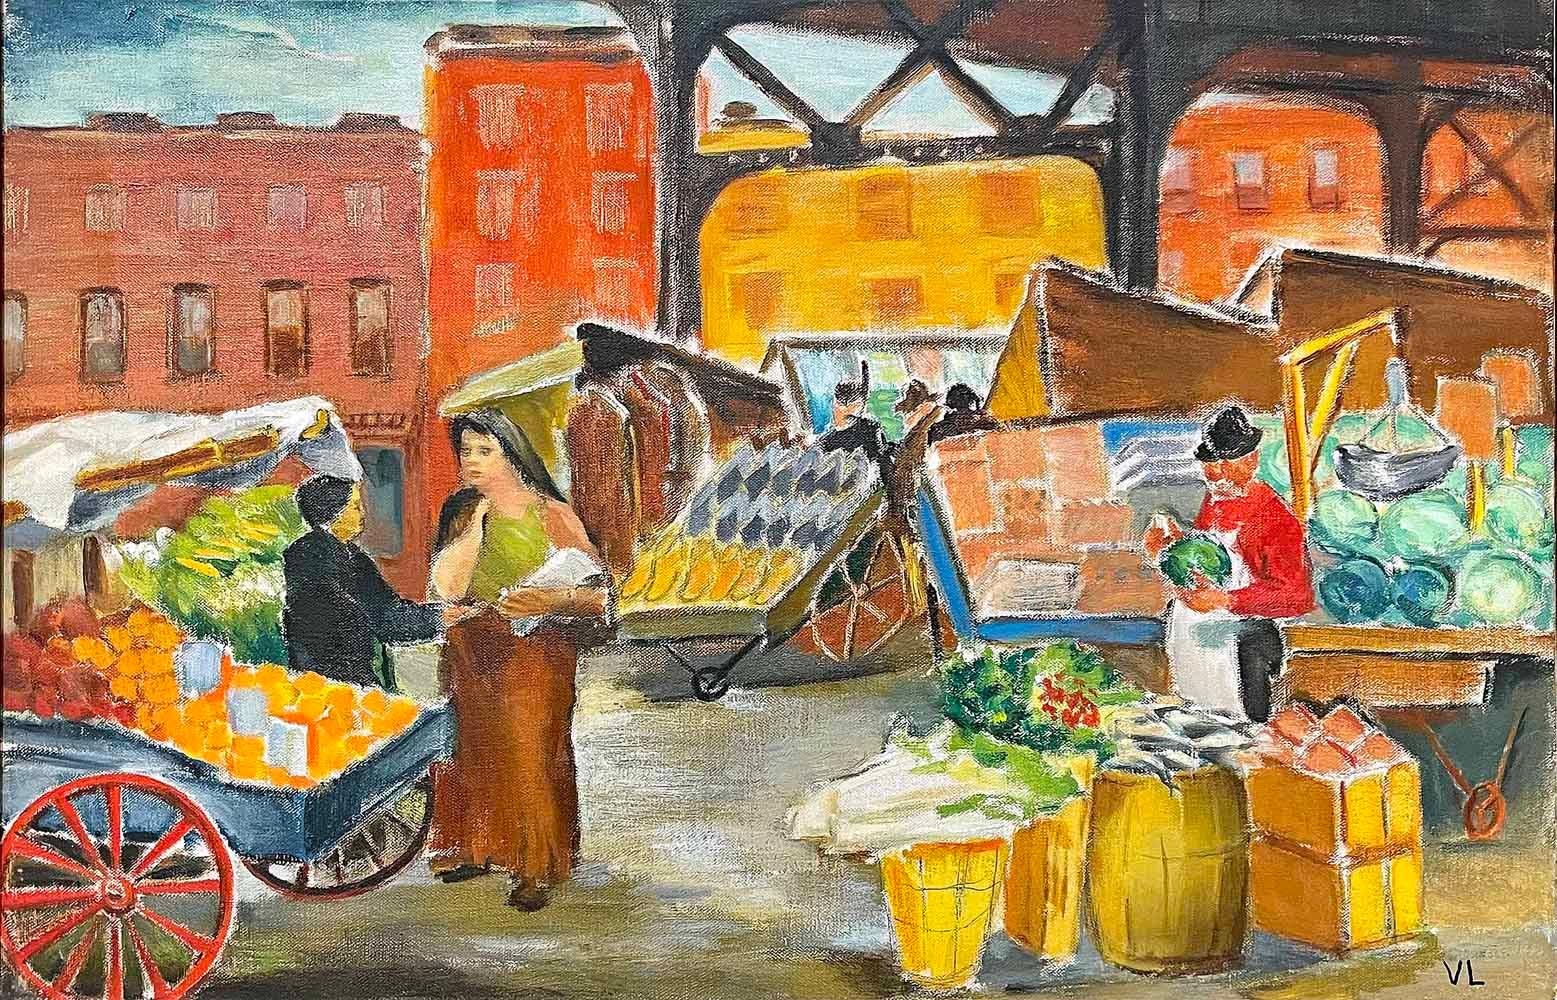 Brilliantly painted in a palette of canary yellow, orange-red, browns and blues, this WPA-period painting of an open-air market under the Market-Frankford elevated train line (